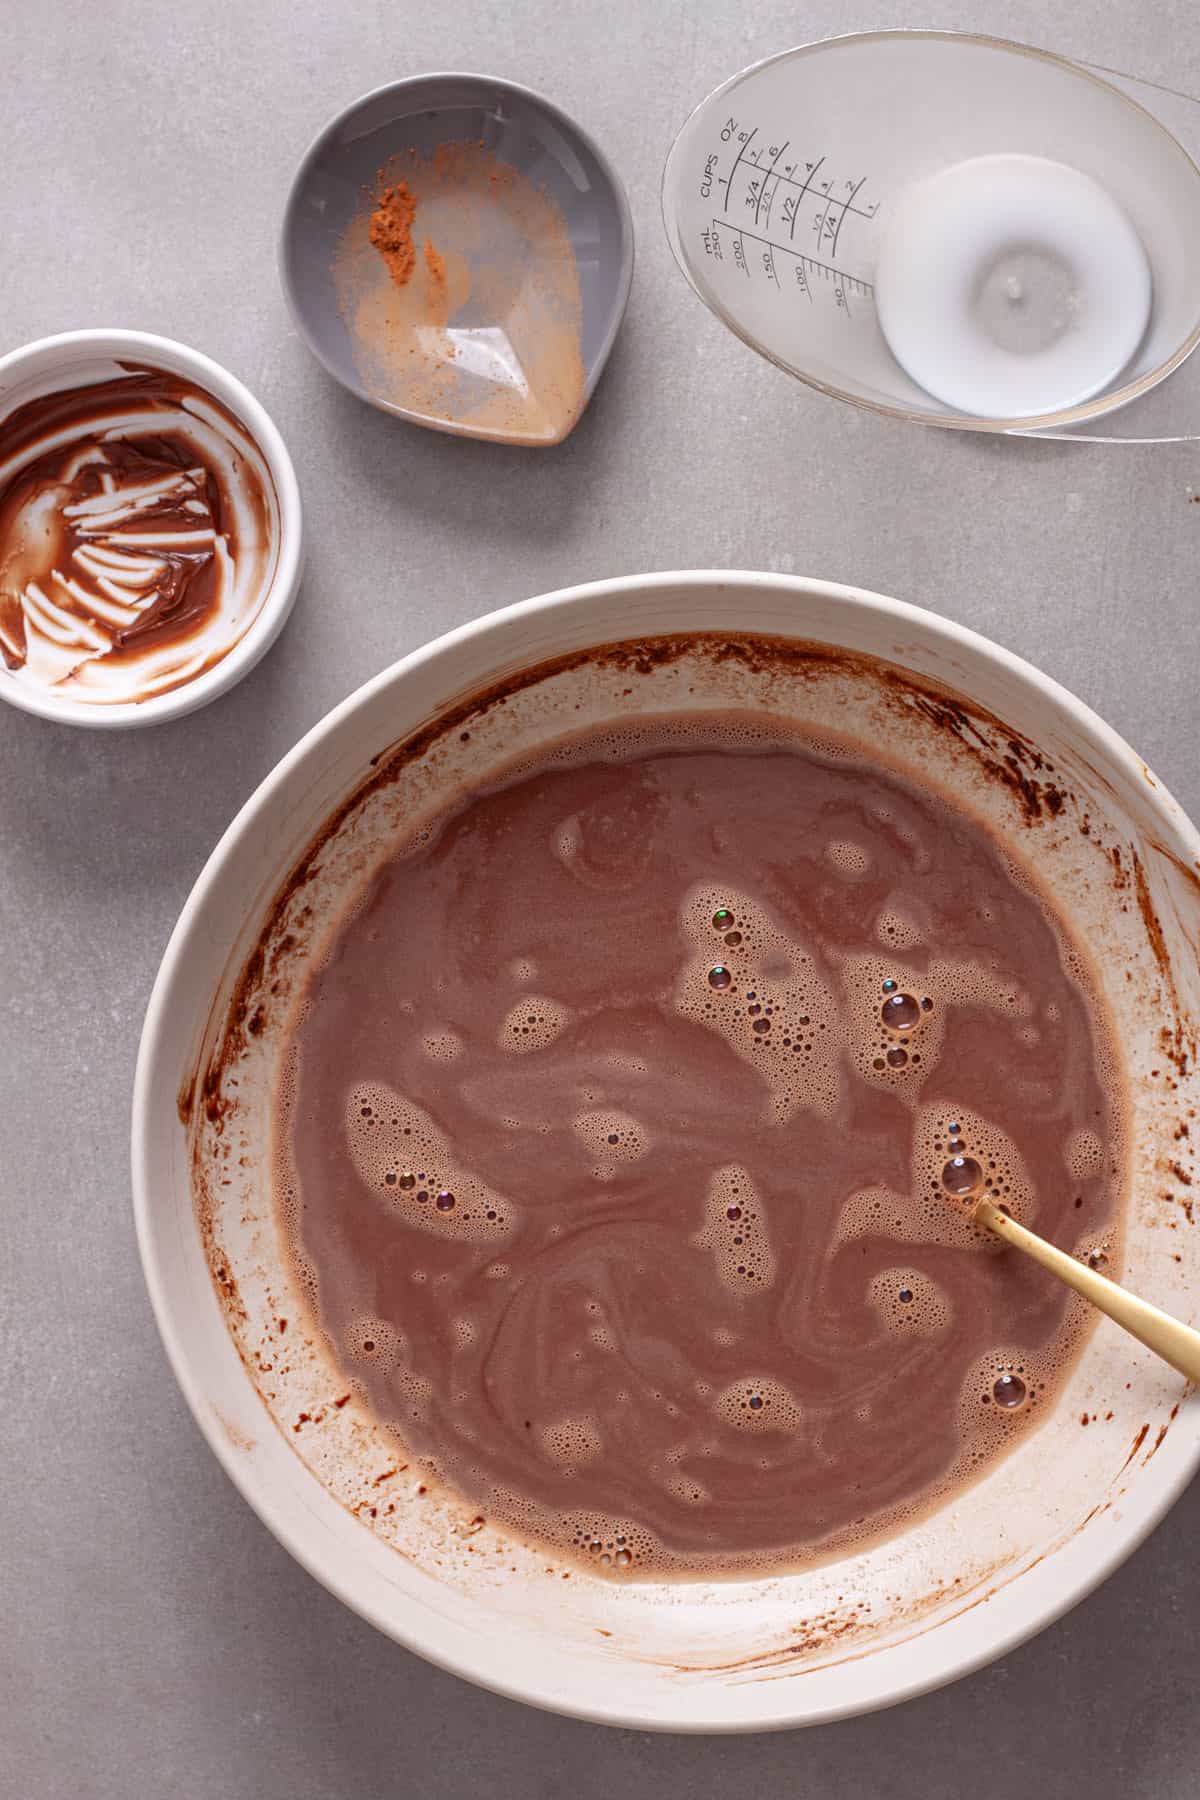 Milk, cocoa powder and nutella getting stirred together in a white mixing bowl.